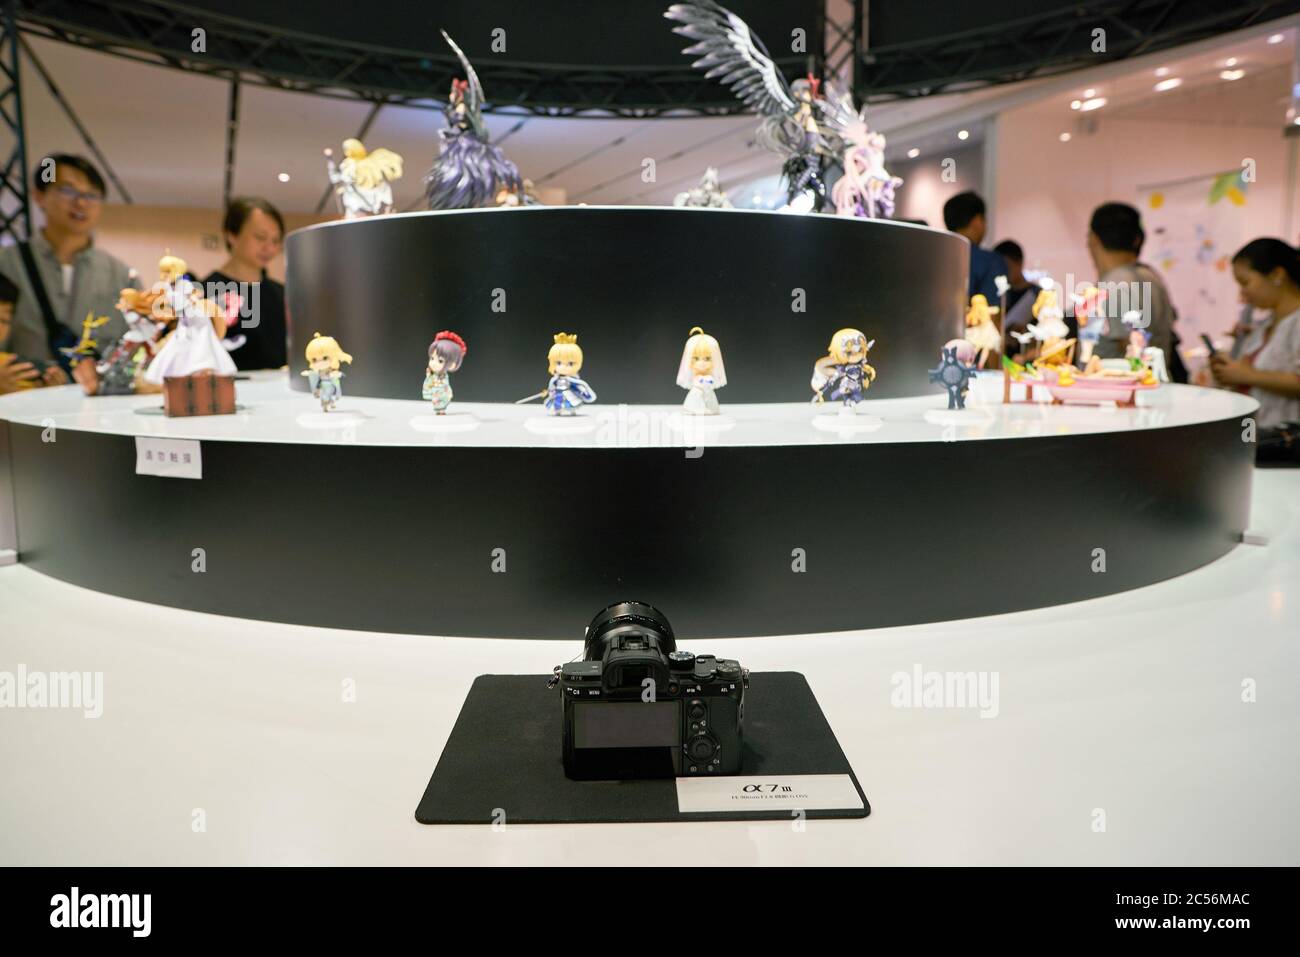 SHENZHEN, CHINA - APRIL 21, 2019: toy figures on display at Sony Expo 2019 in UpperHills shopping mall. Stock Photo